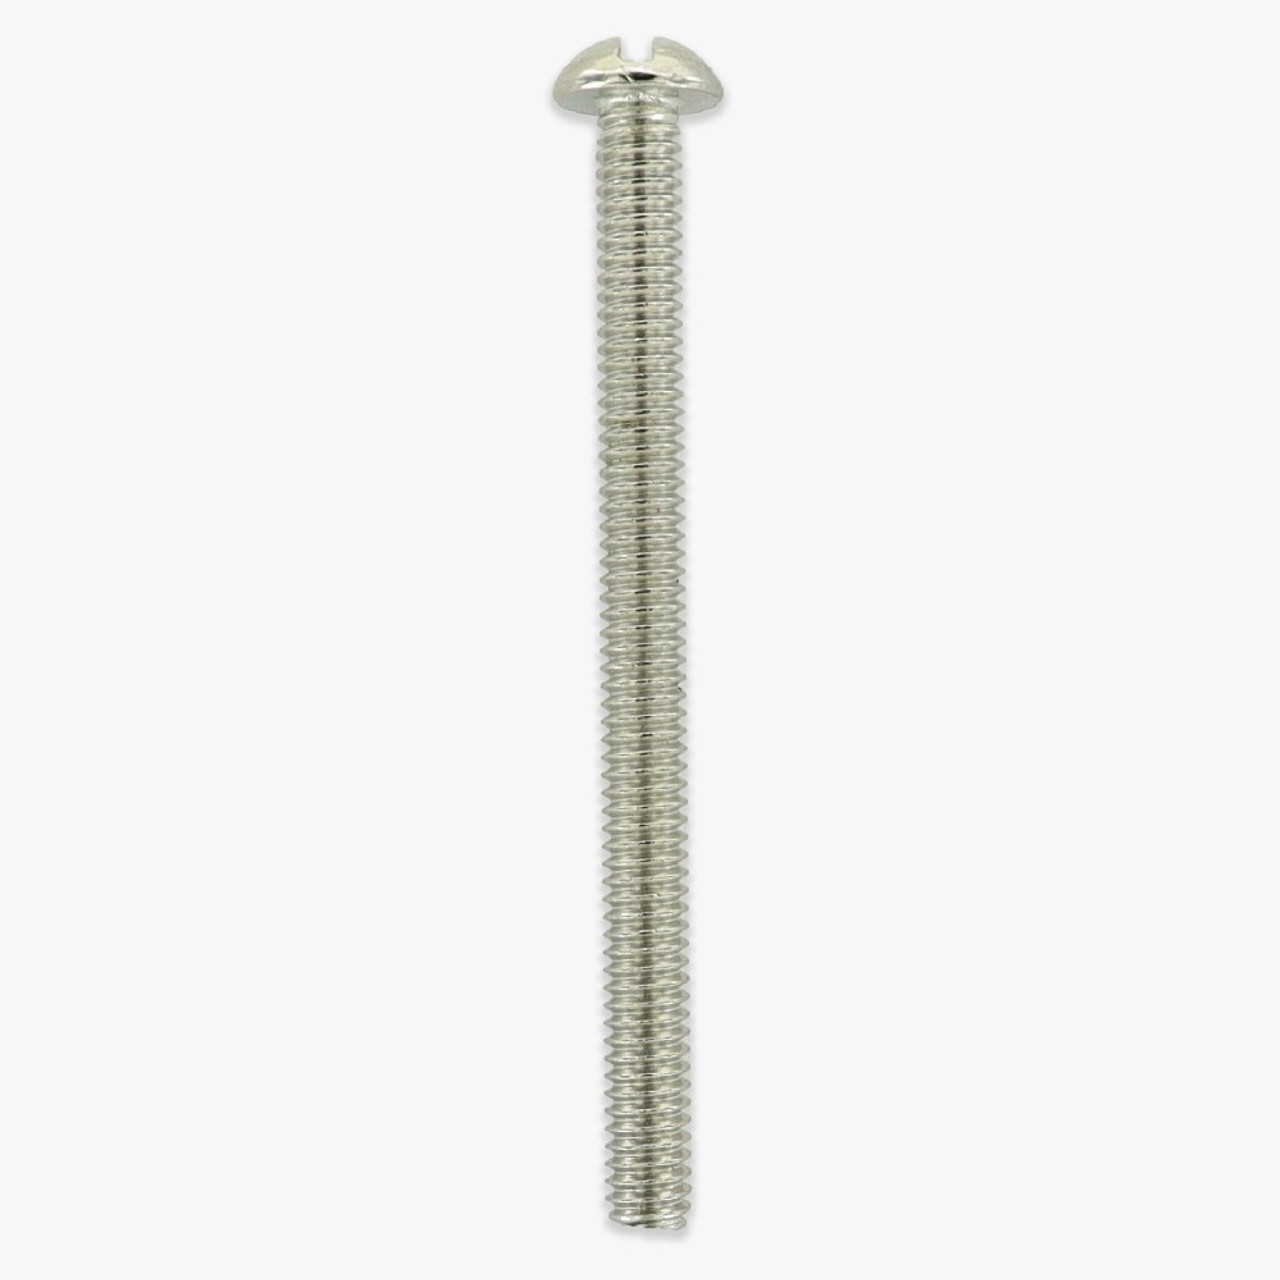 8/32 Thread - 2in. Long - Slotted Round Head Steel Screw